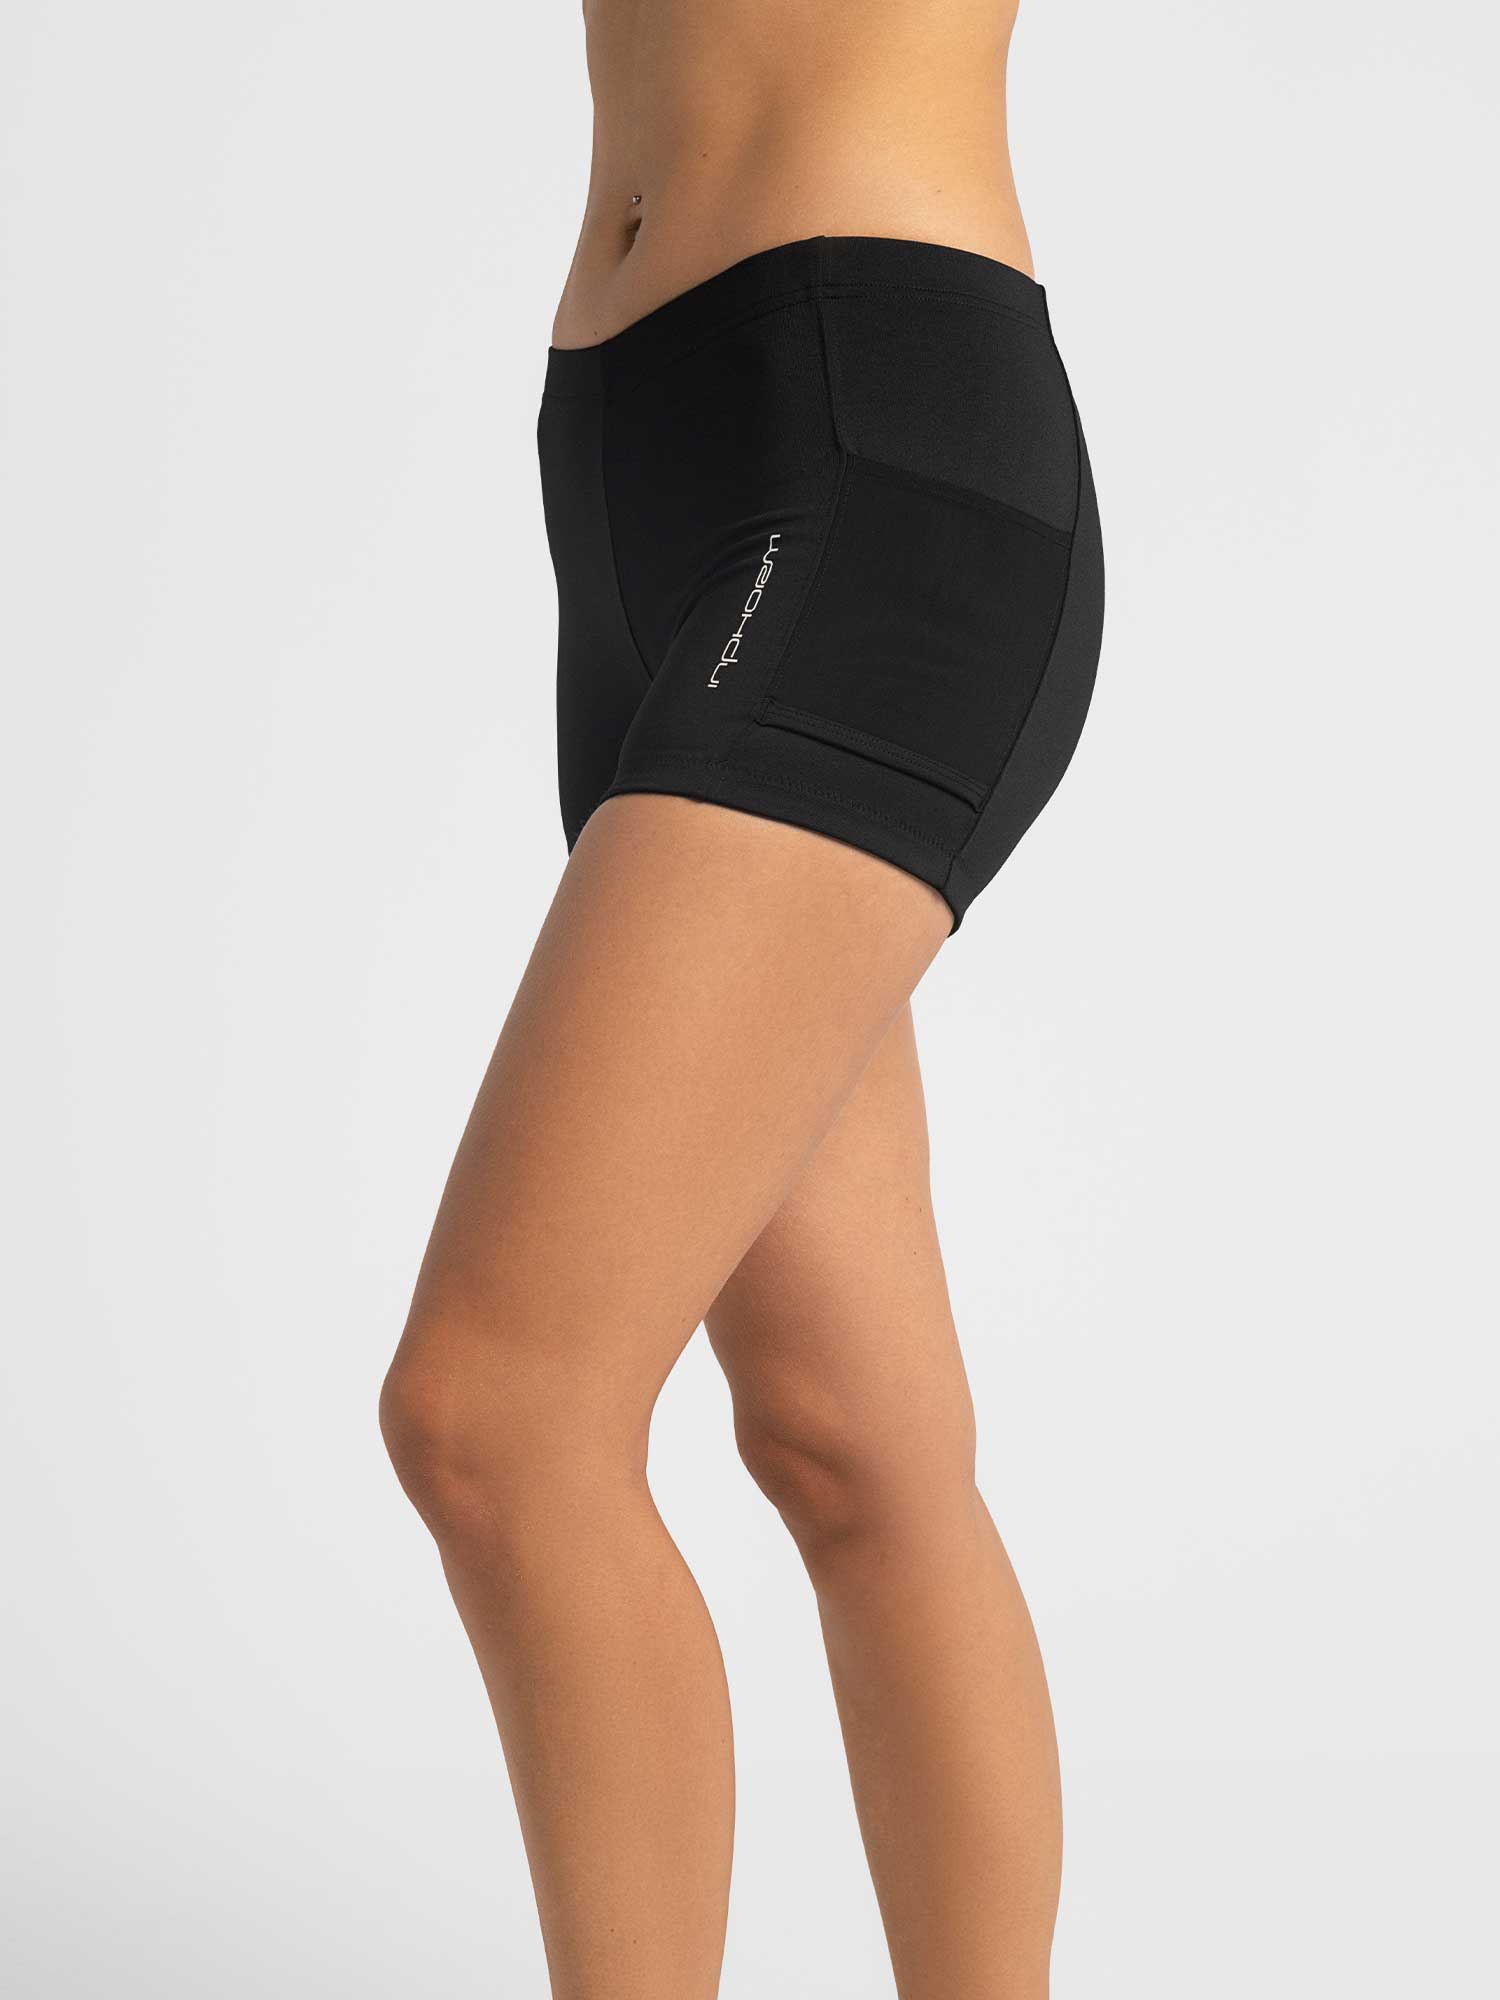 Side view of model wearing the tennis ace shorts in black by inPhorm NYC